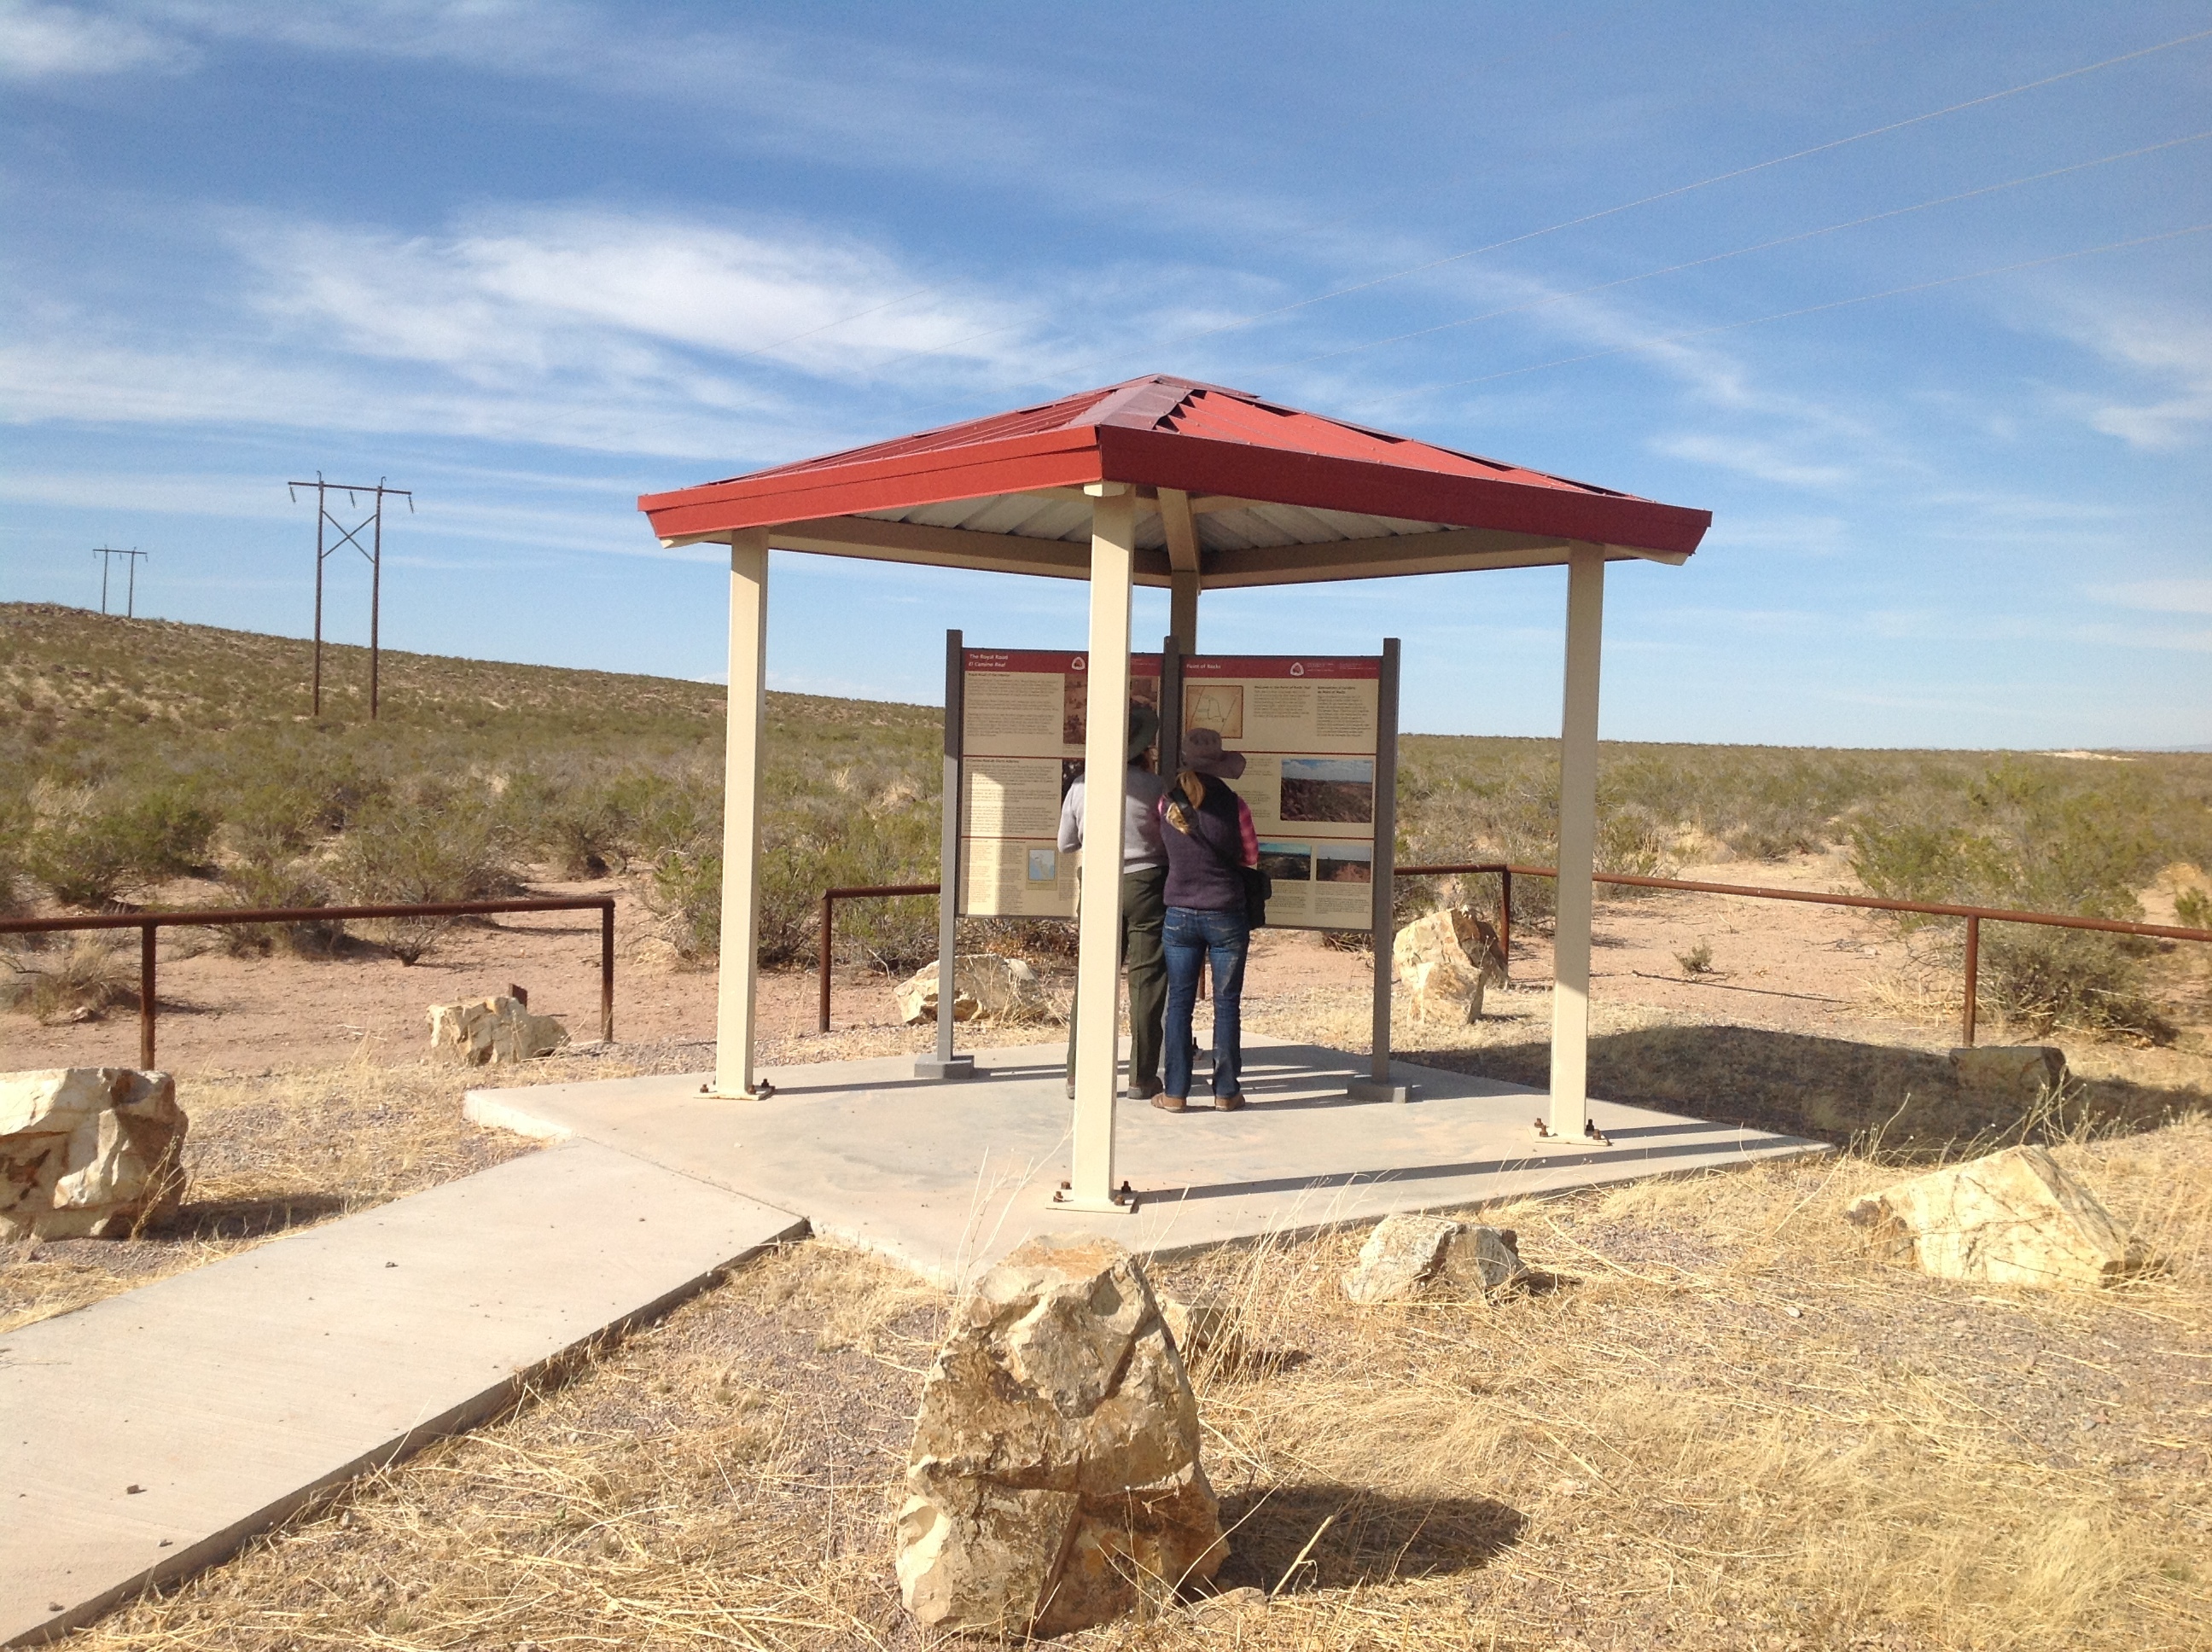 A kiosk shelter at the Jornada Del Muerto along the El Camino Real de Tierra Adentro National Historic Trail outside of Truth or Consequences, NM